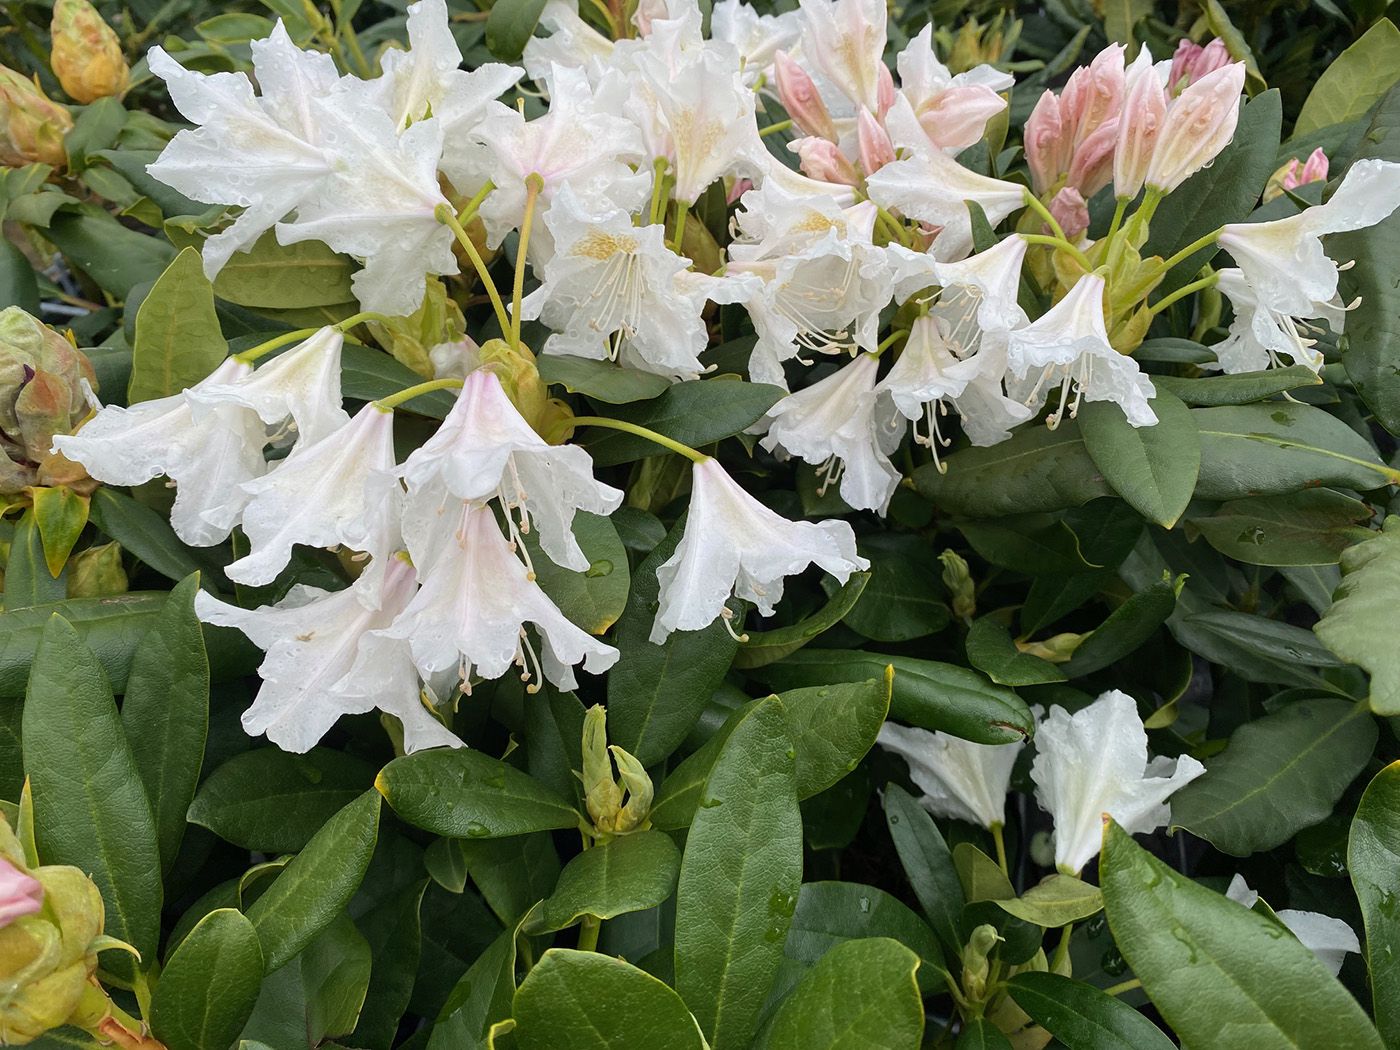 Rhododendron 'Cunningham's White' in Blüte